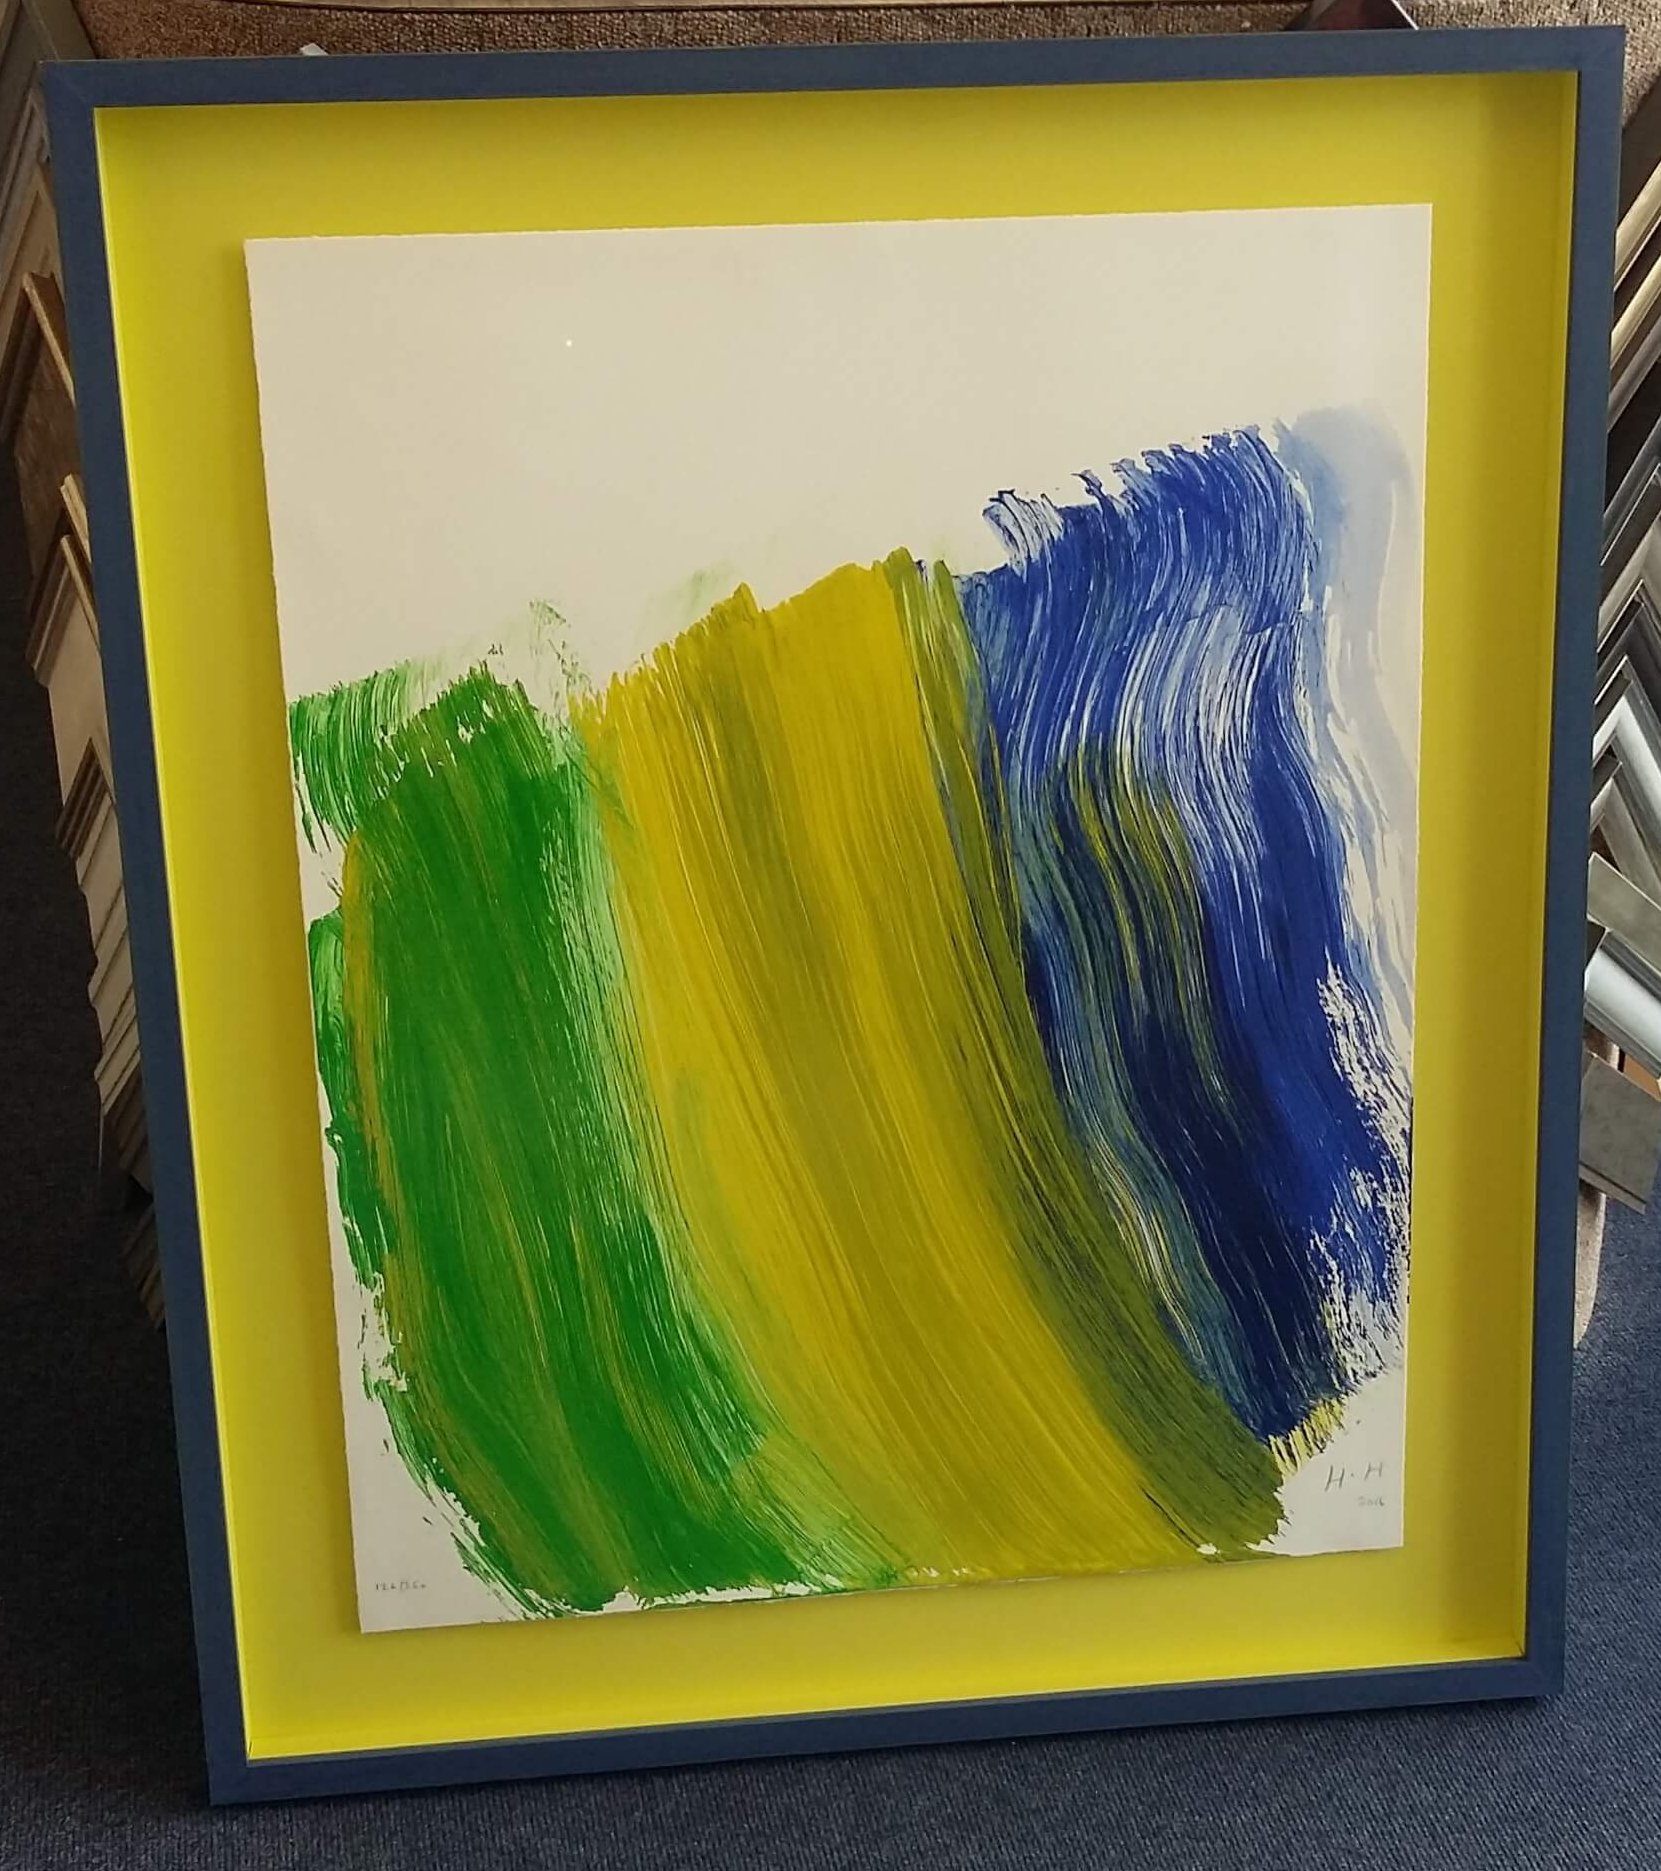 Howard Hodgkins in a hand painted frame